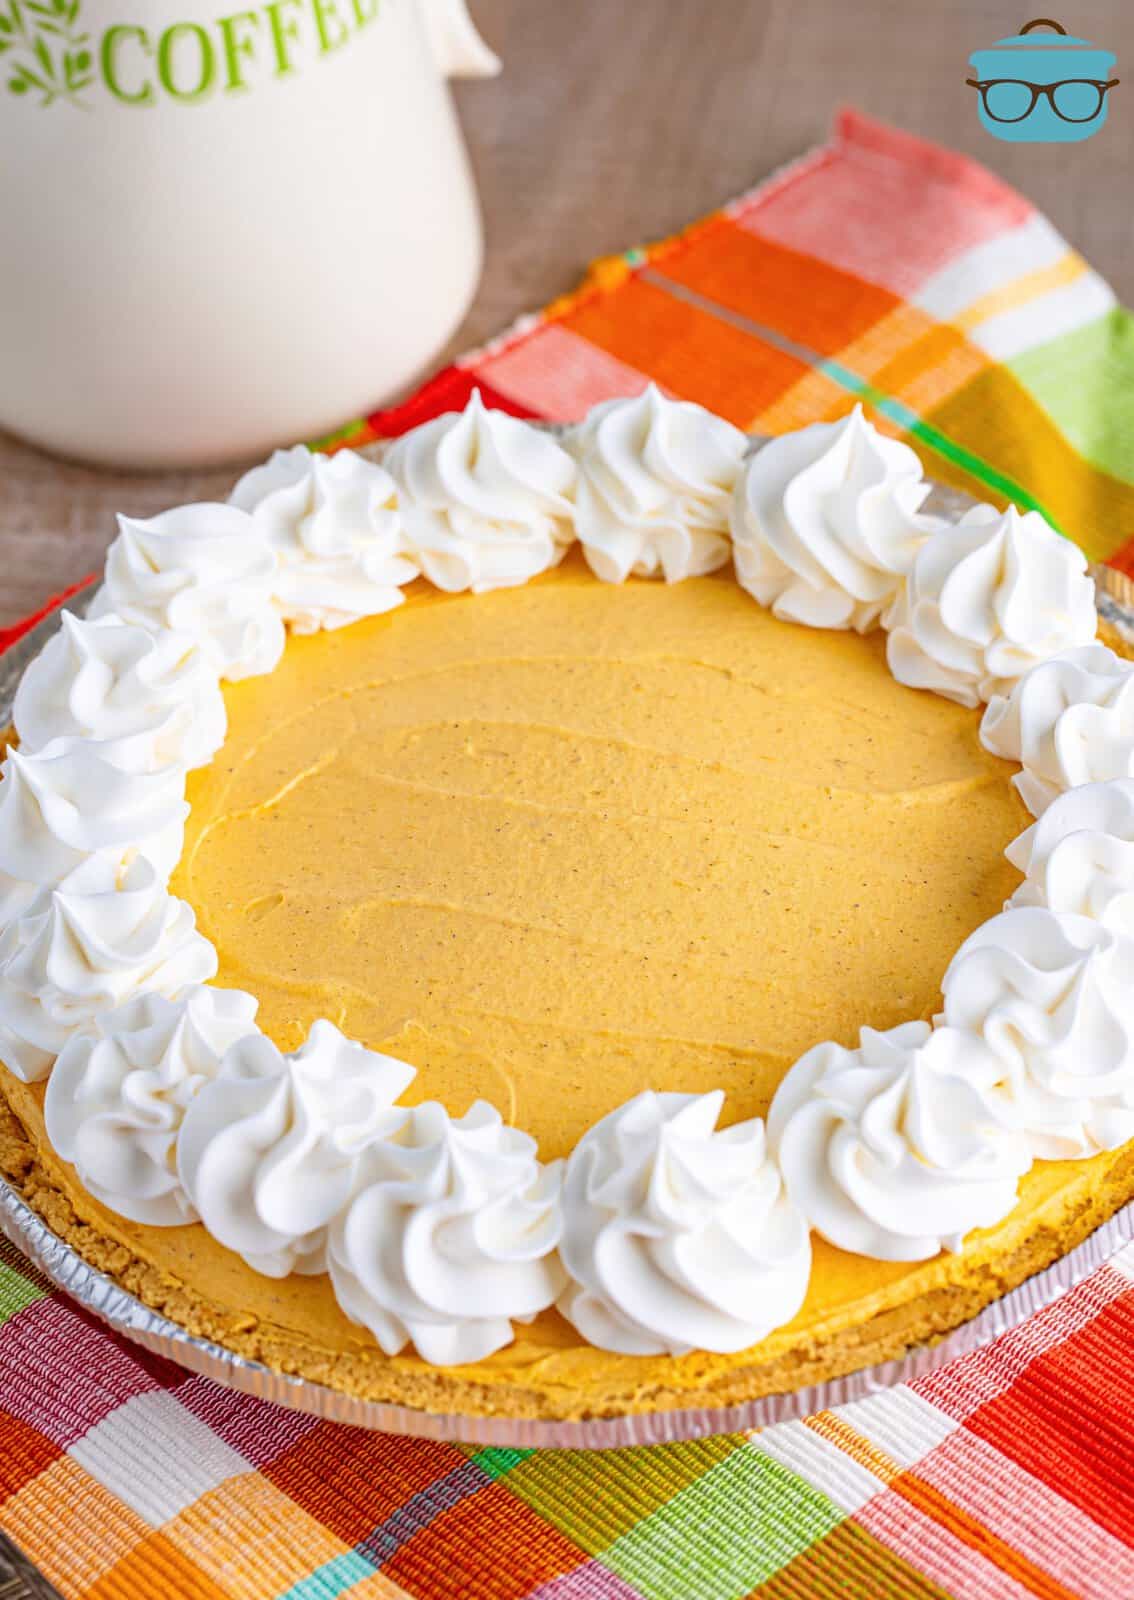 Looking down on a No Bake Pumpkin Cheesecake with whipped cream topping dolloped around.